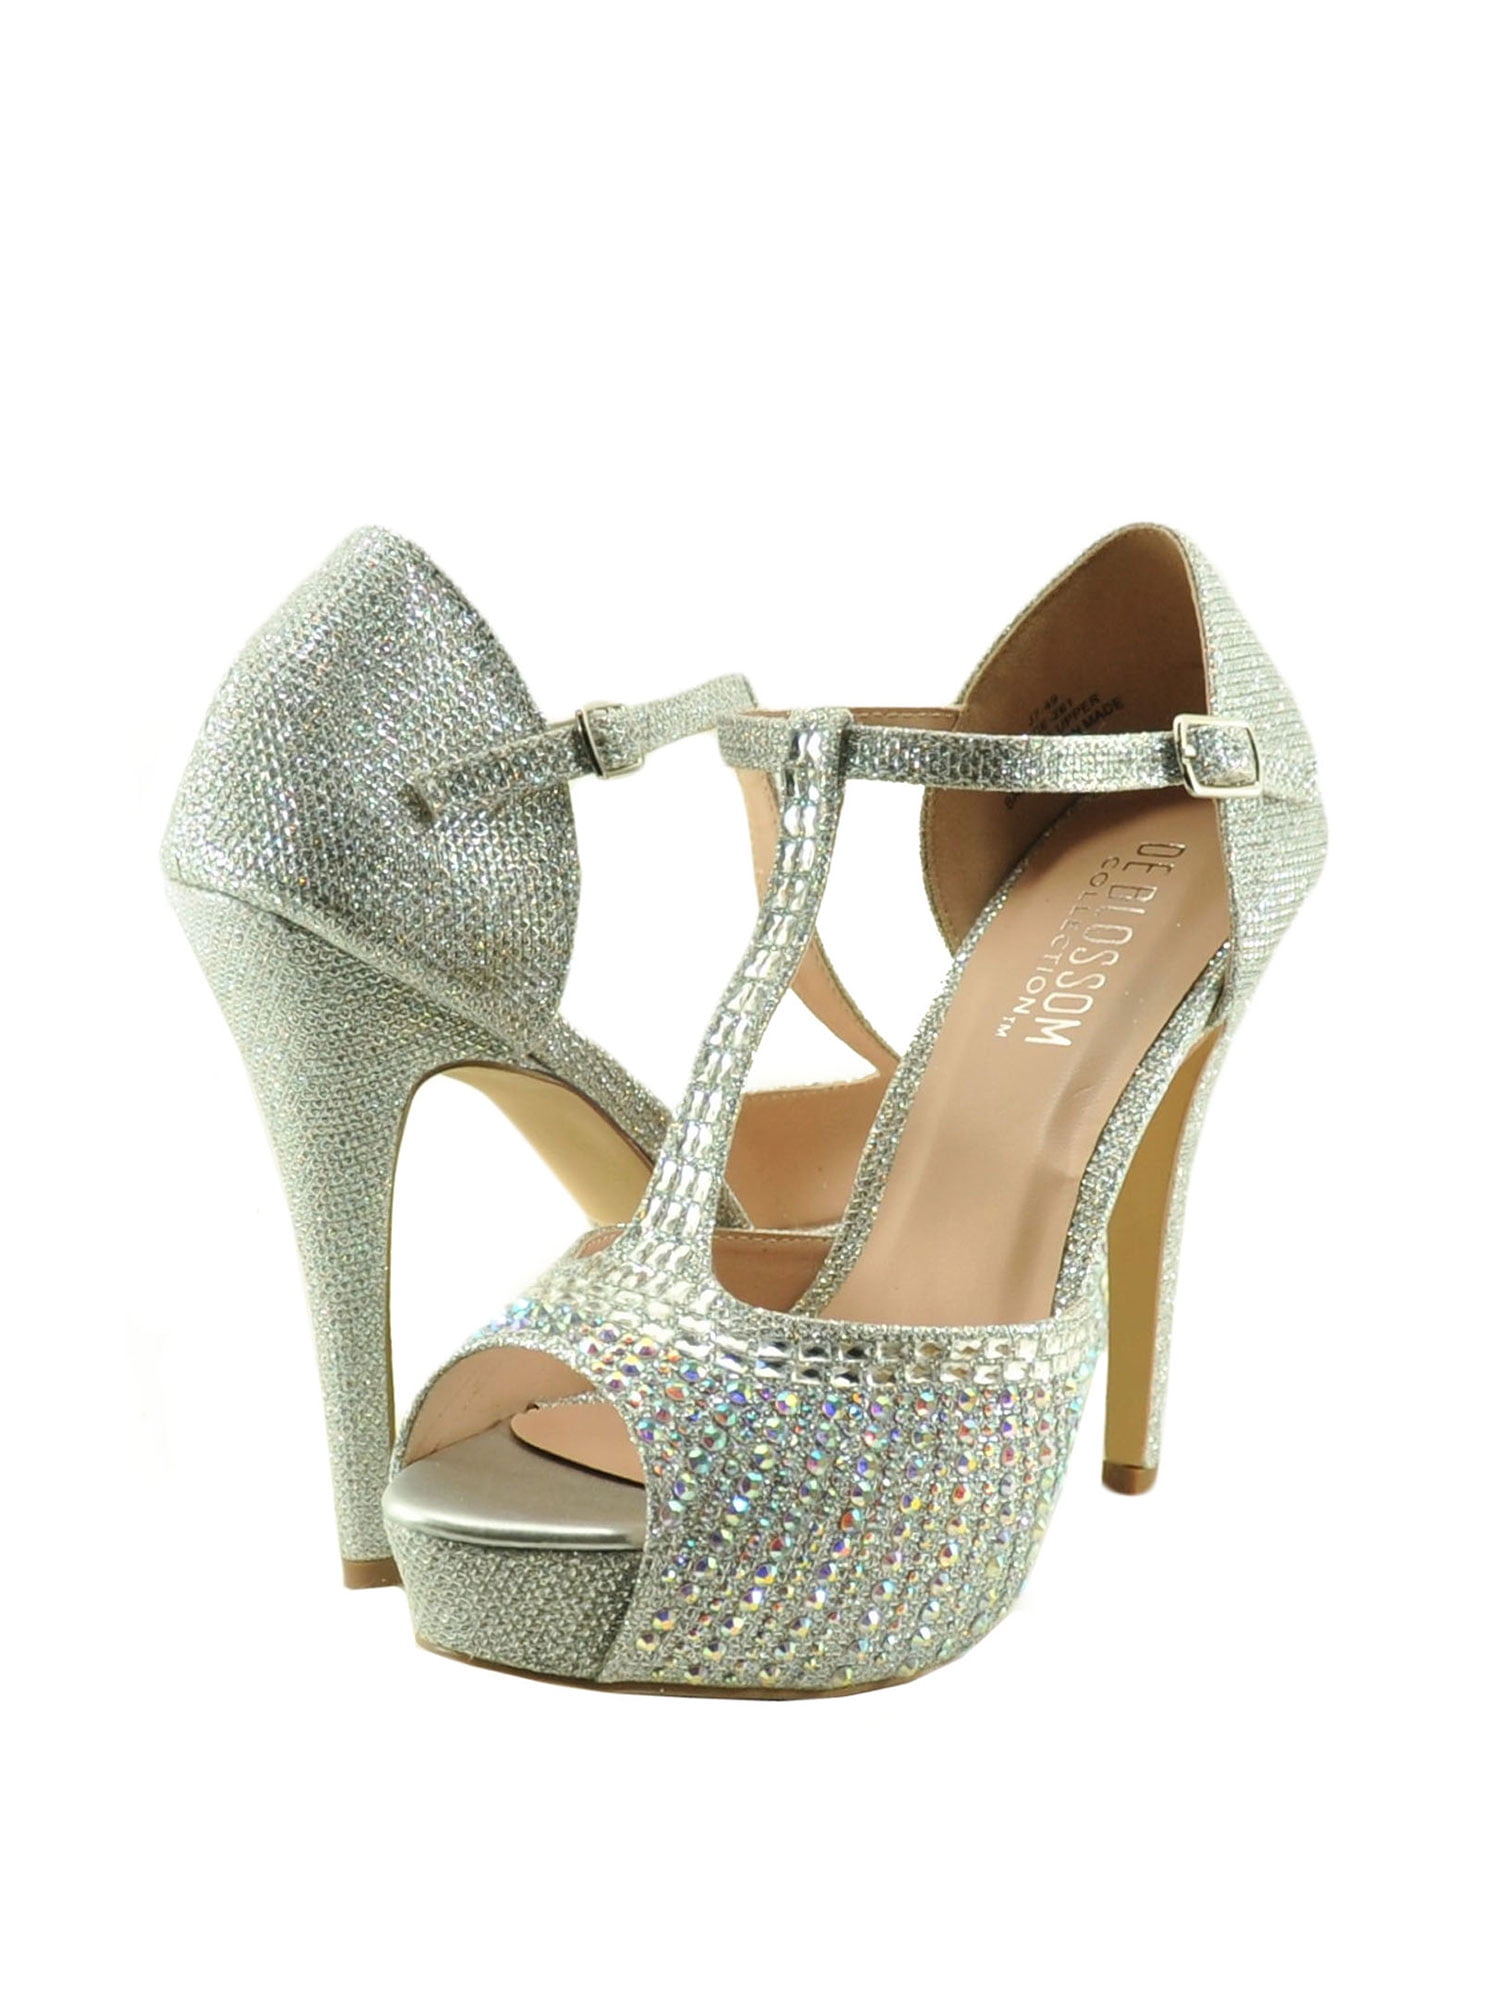 Women's Shoes Blossom Vice 261 T-strap Rhinestone Heels Nude Sparkle *New*